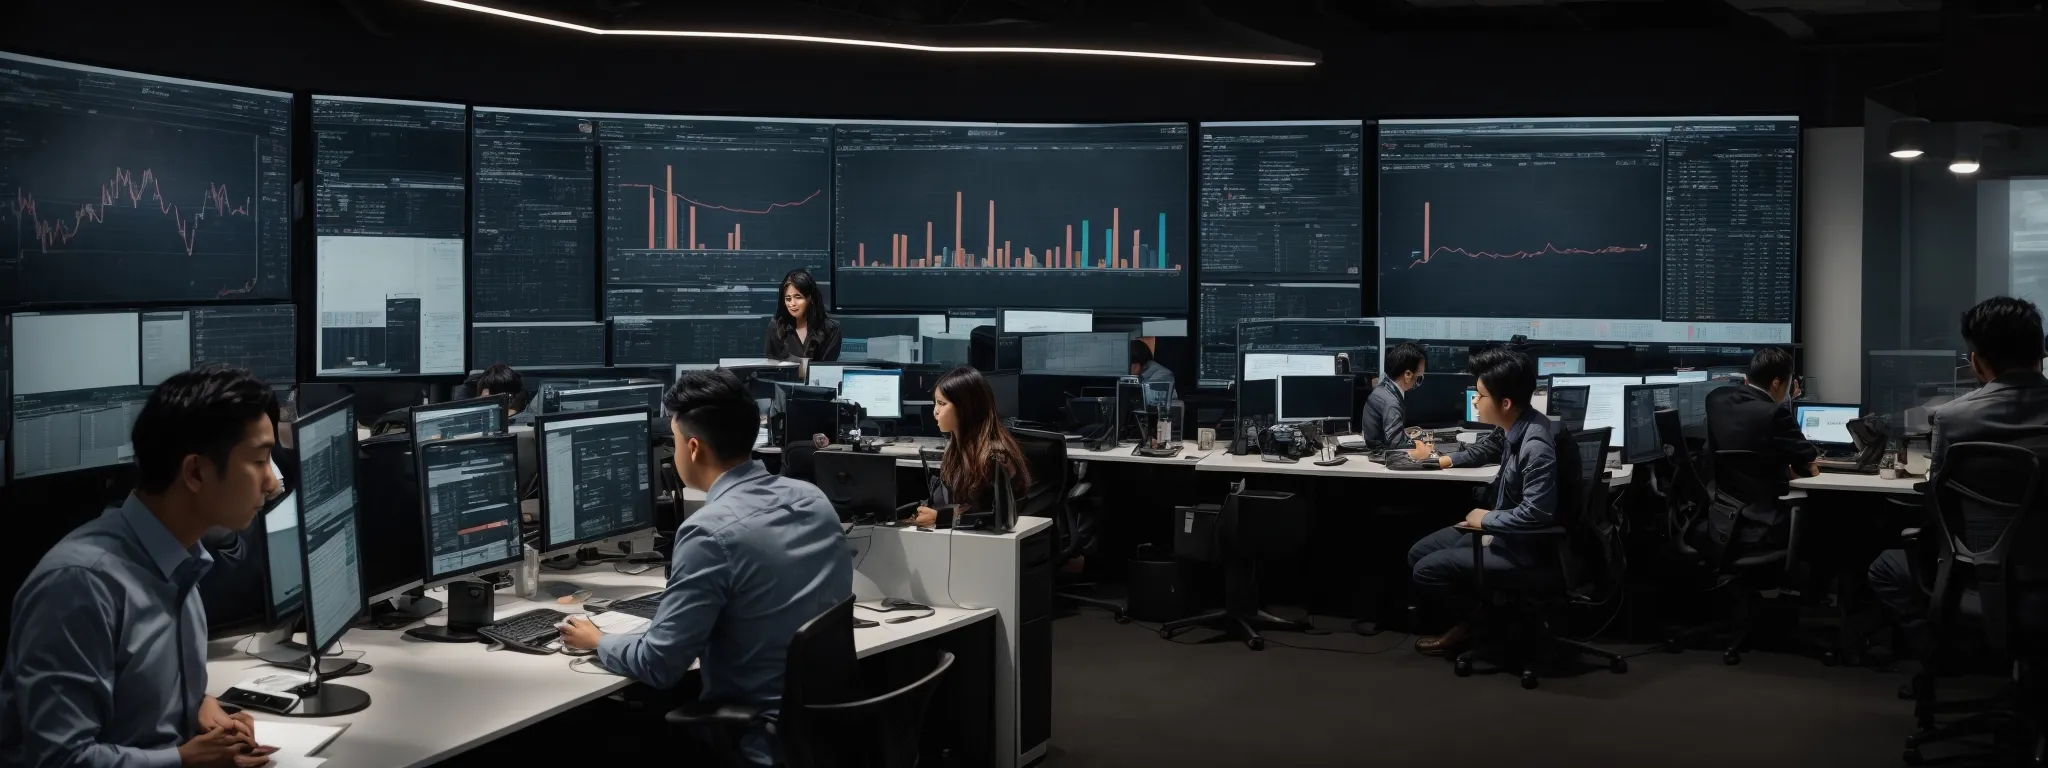 a bustling digital marketing office with professionals discussing strategies around a large computer screen displaying analytics graphs.